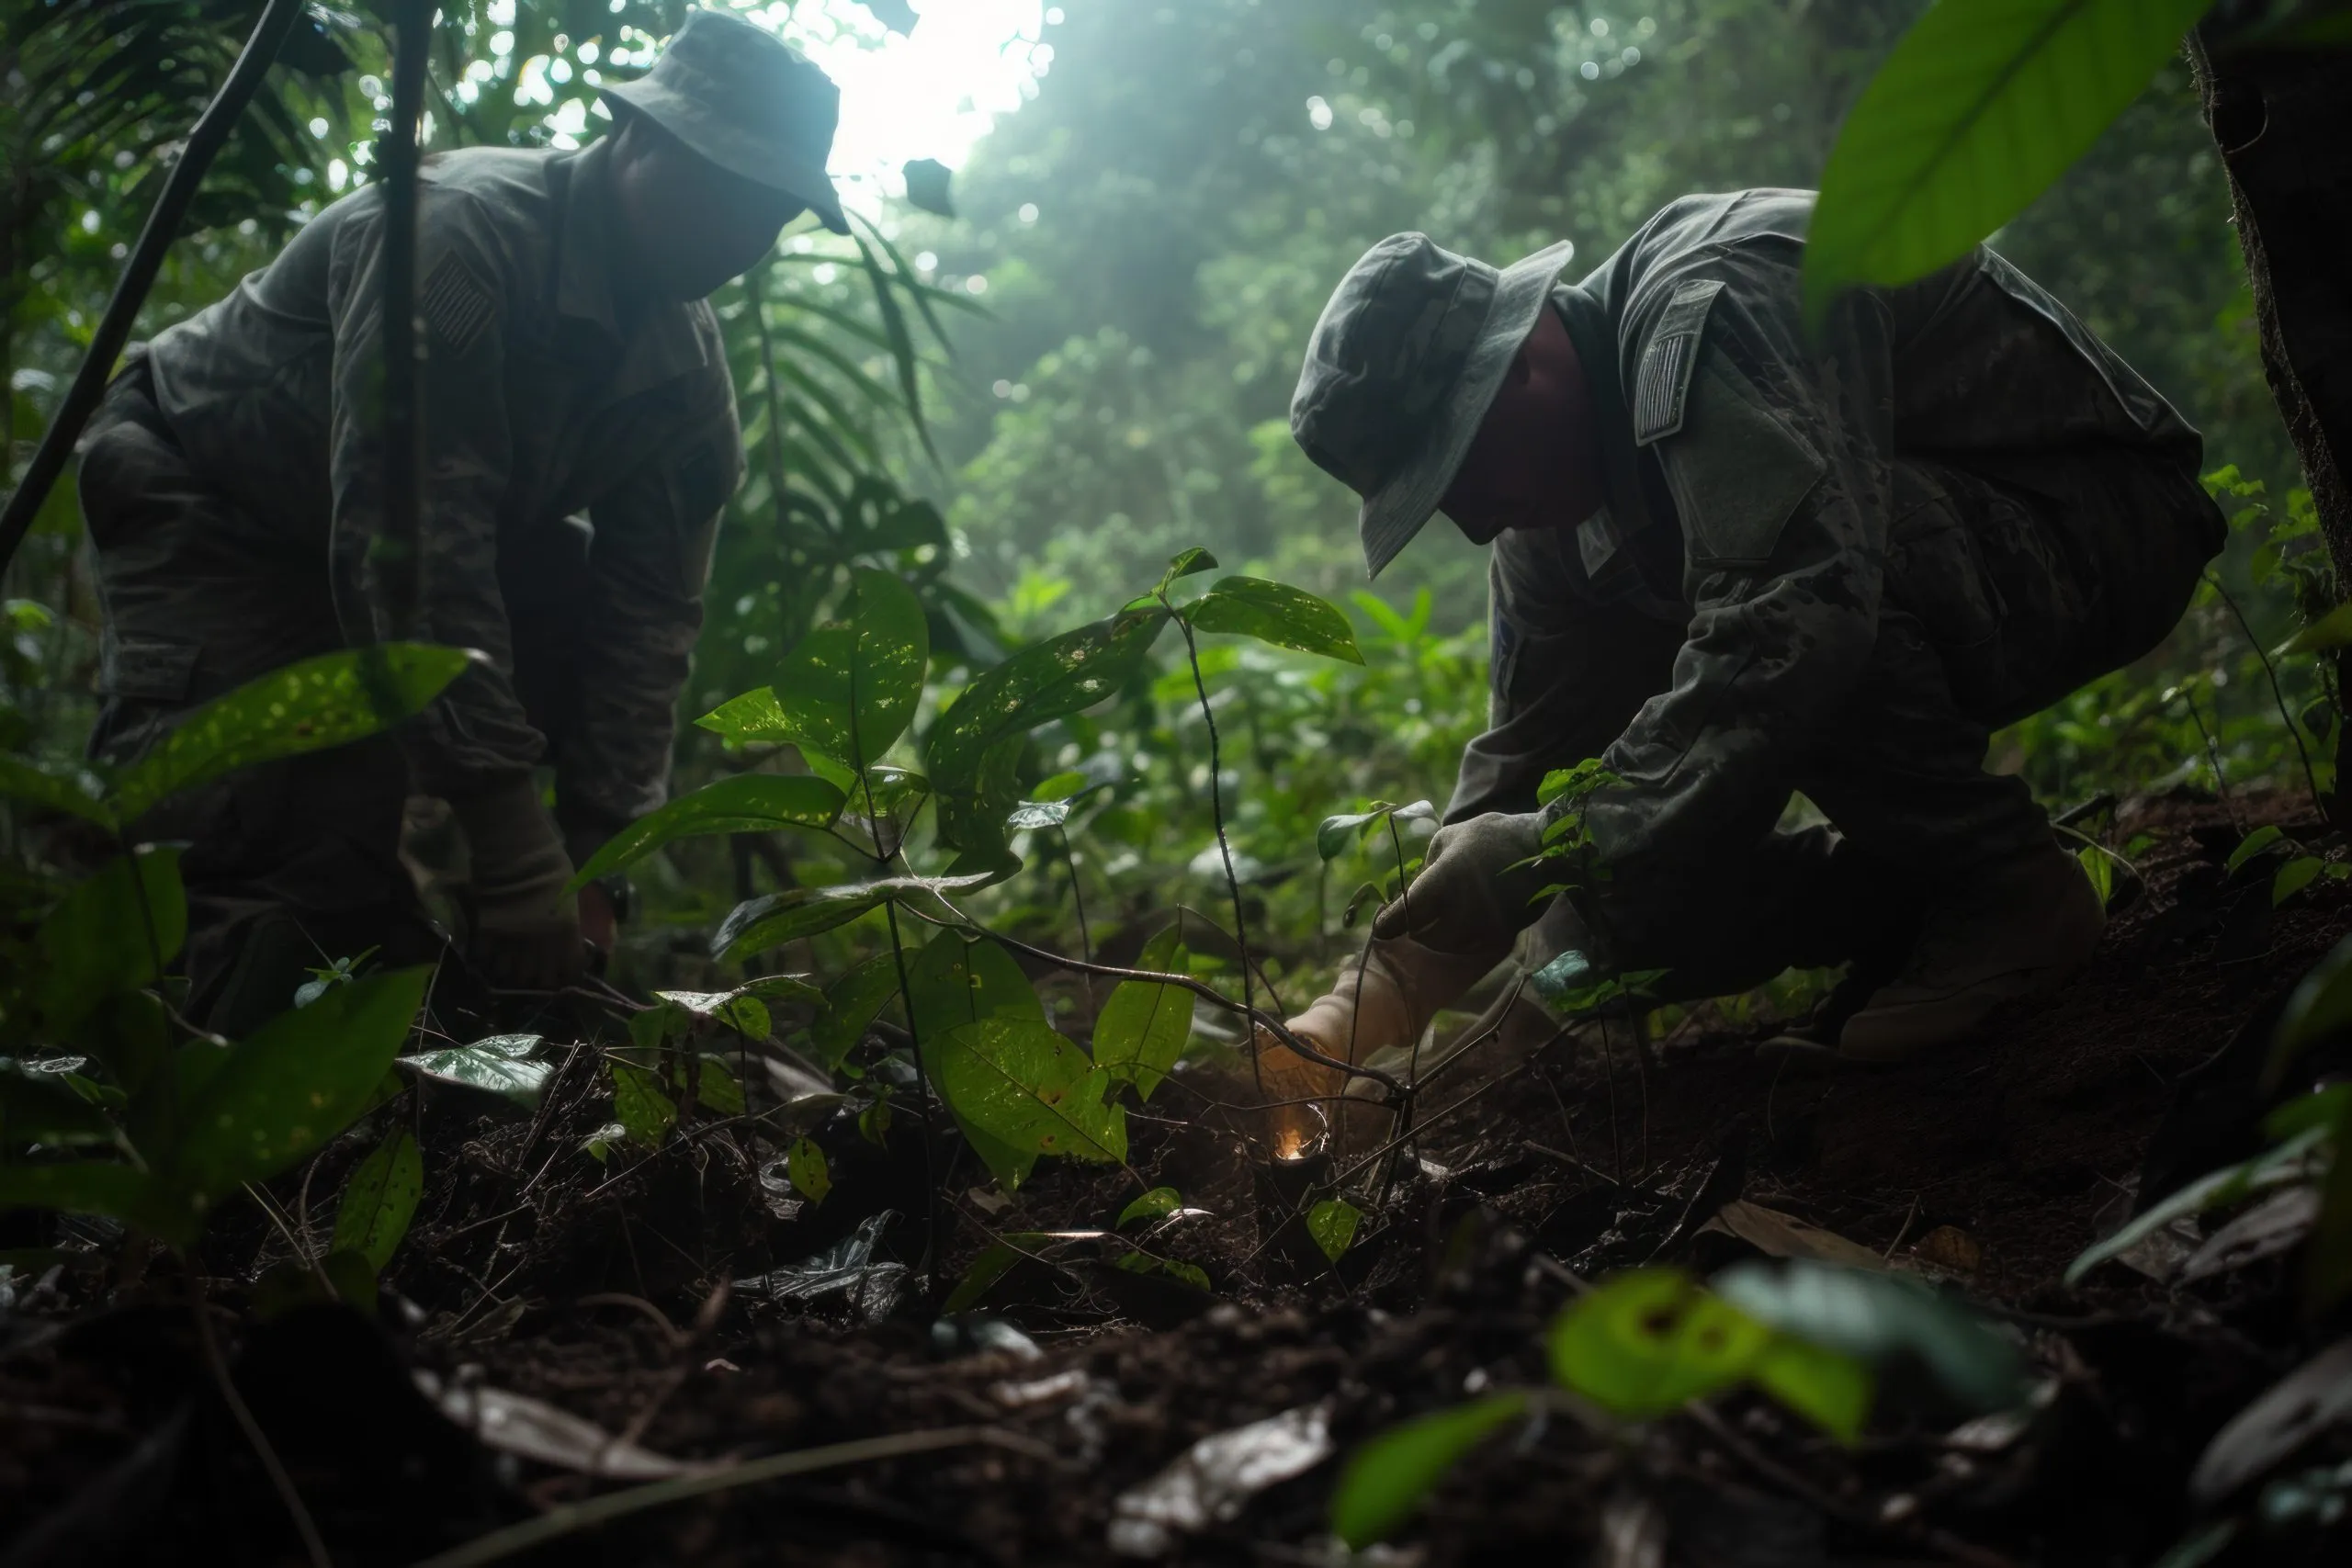 Soldiers Conducting a Ground Search Operation in a Dense Jungle Environment